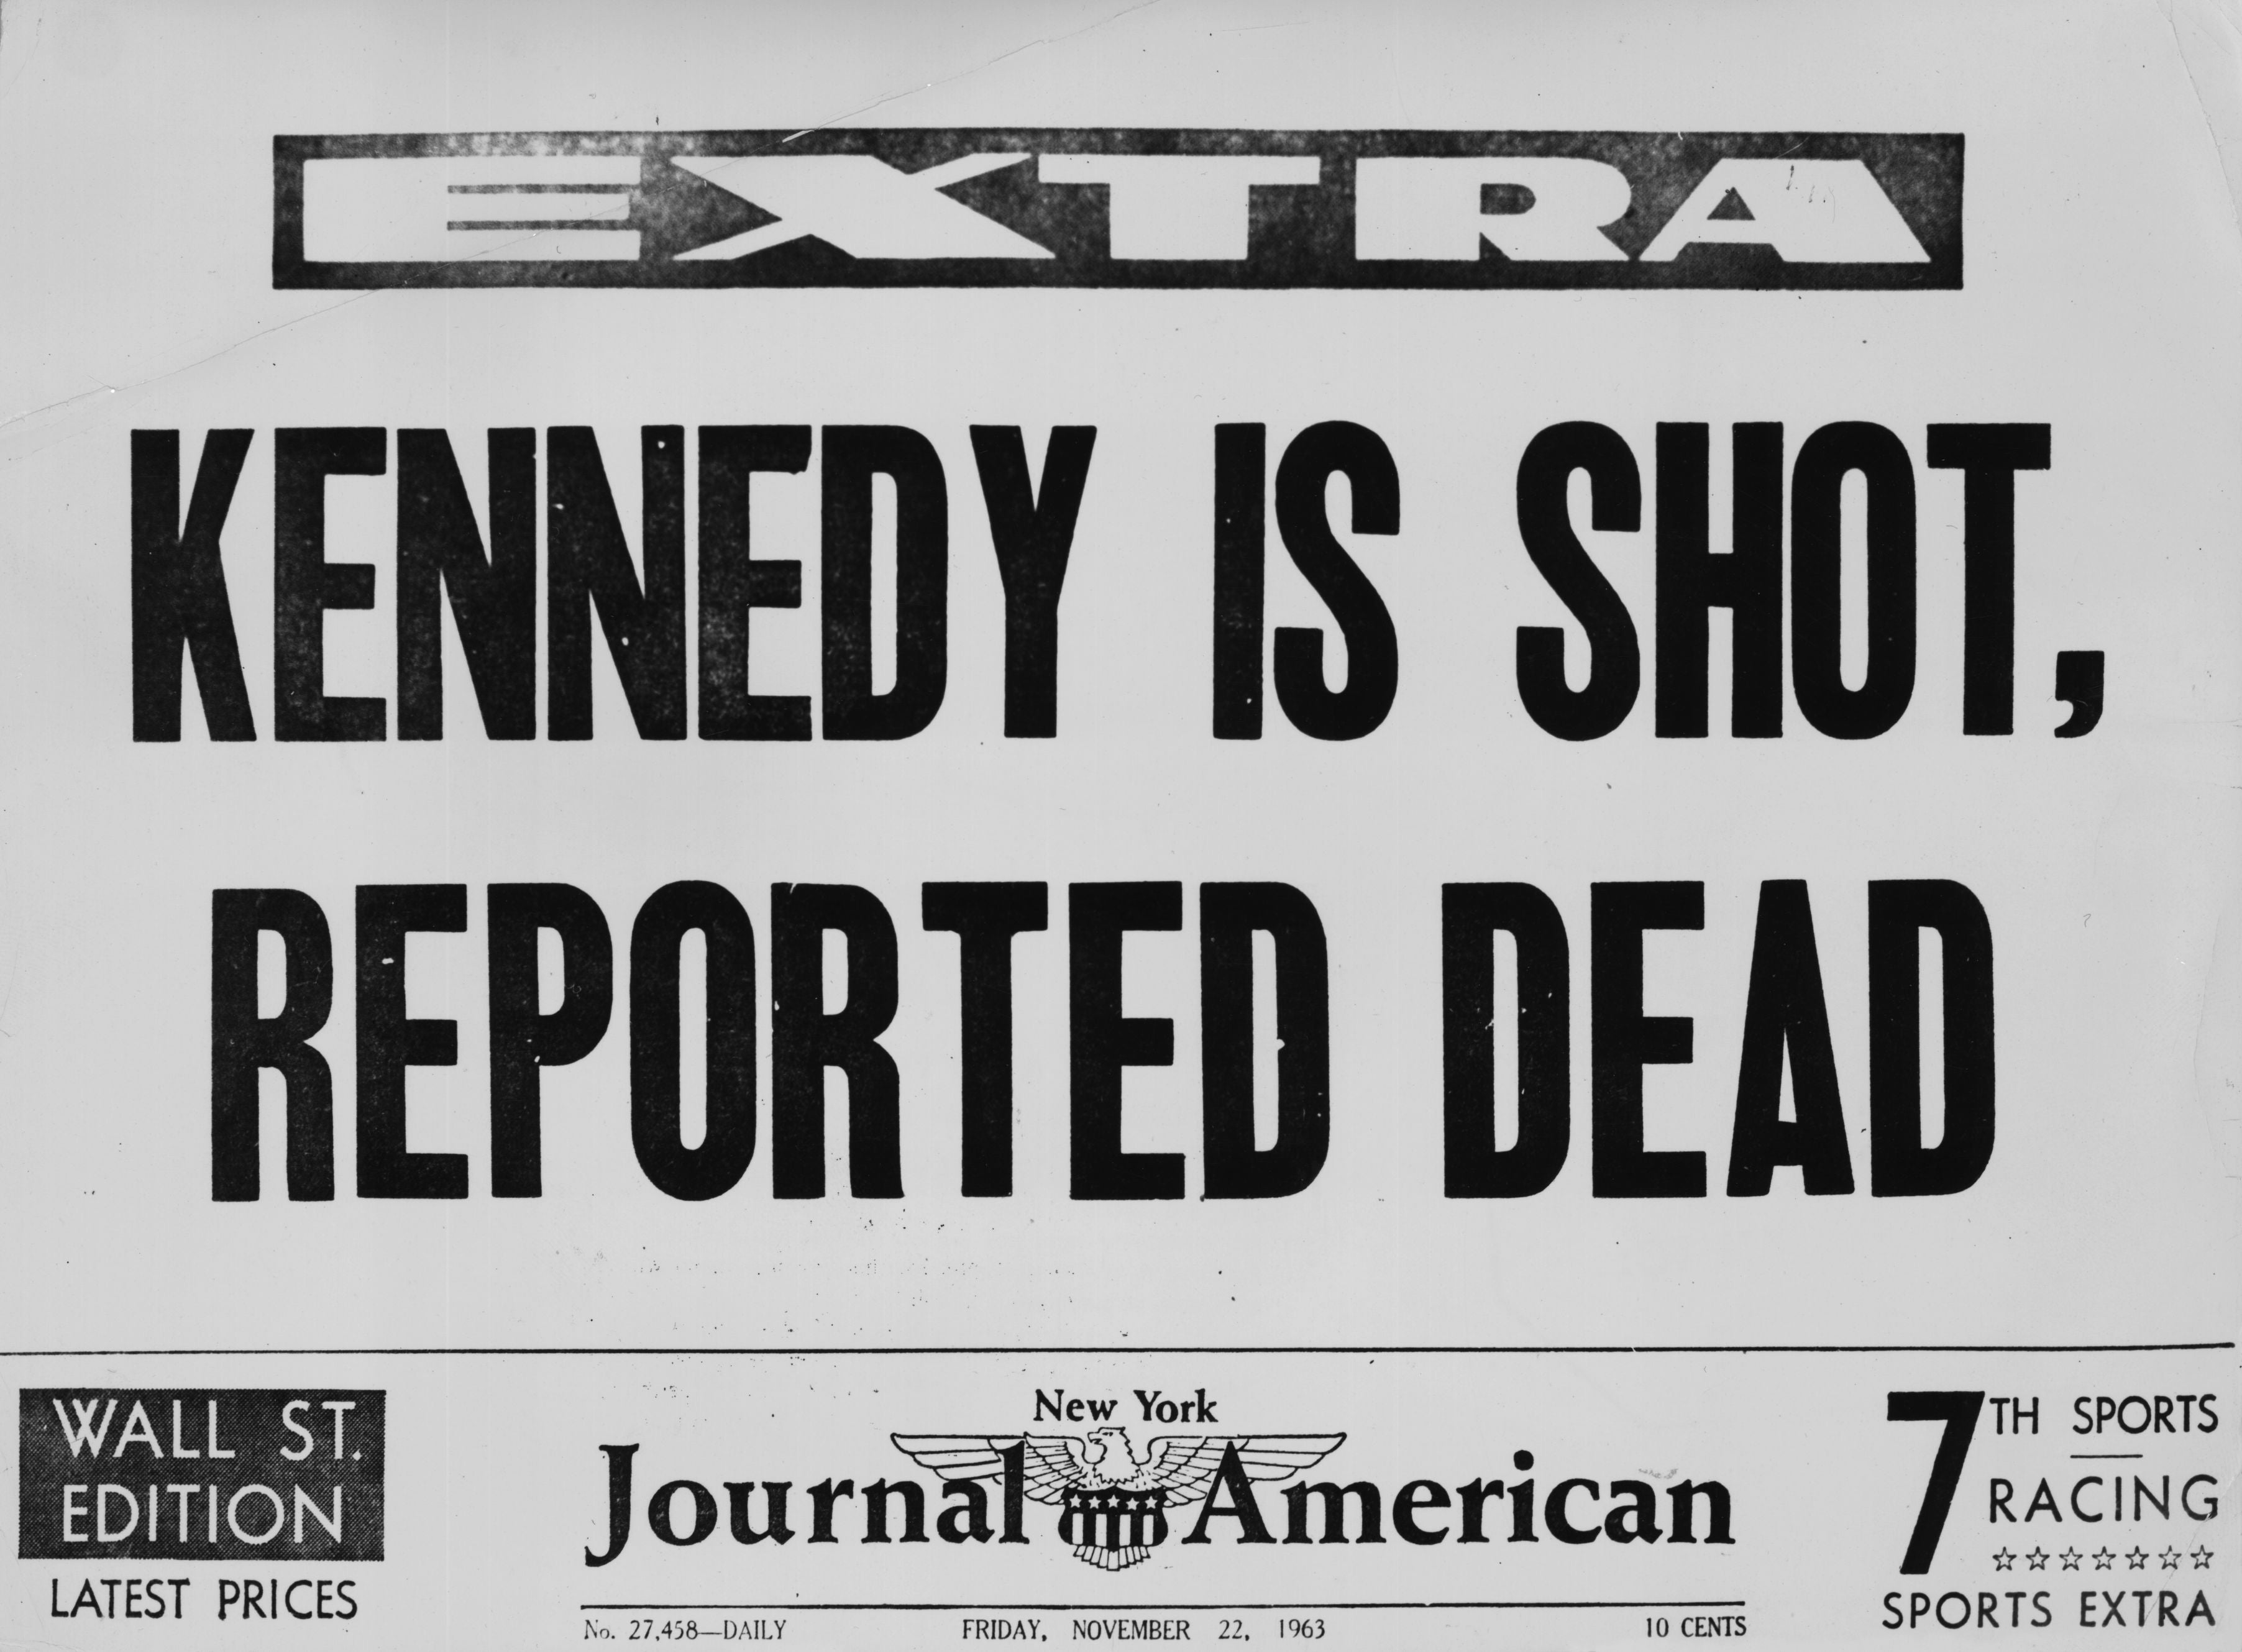 The front page of the New York American Journal announcing the shock news